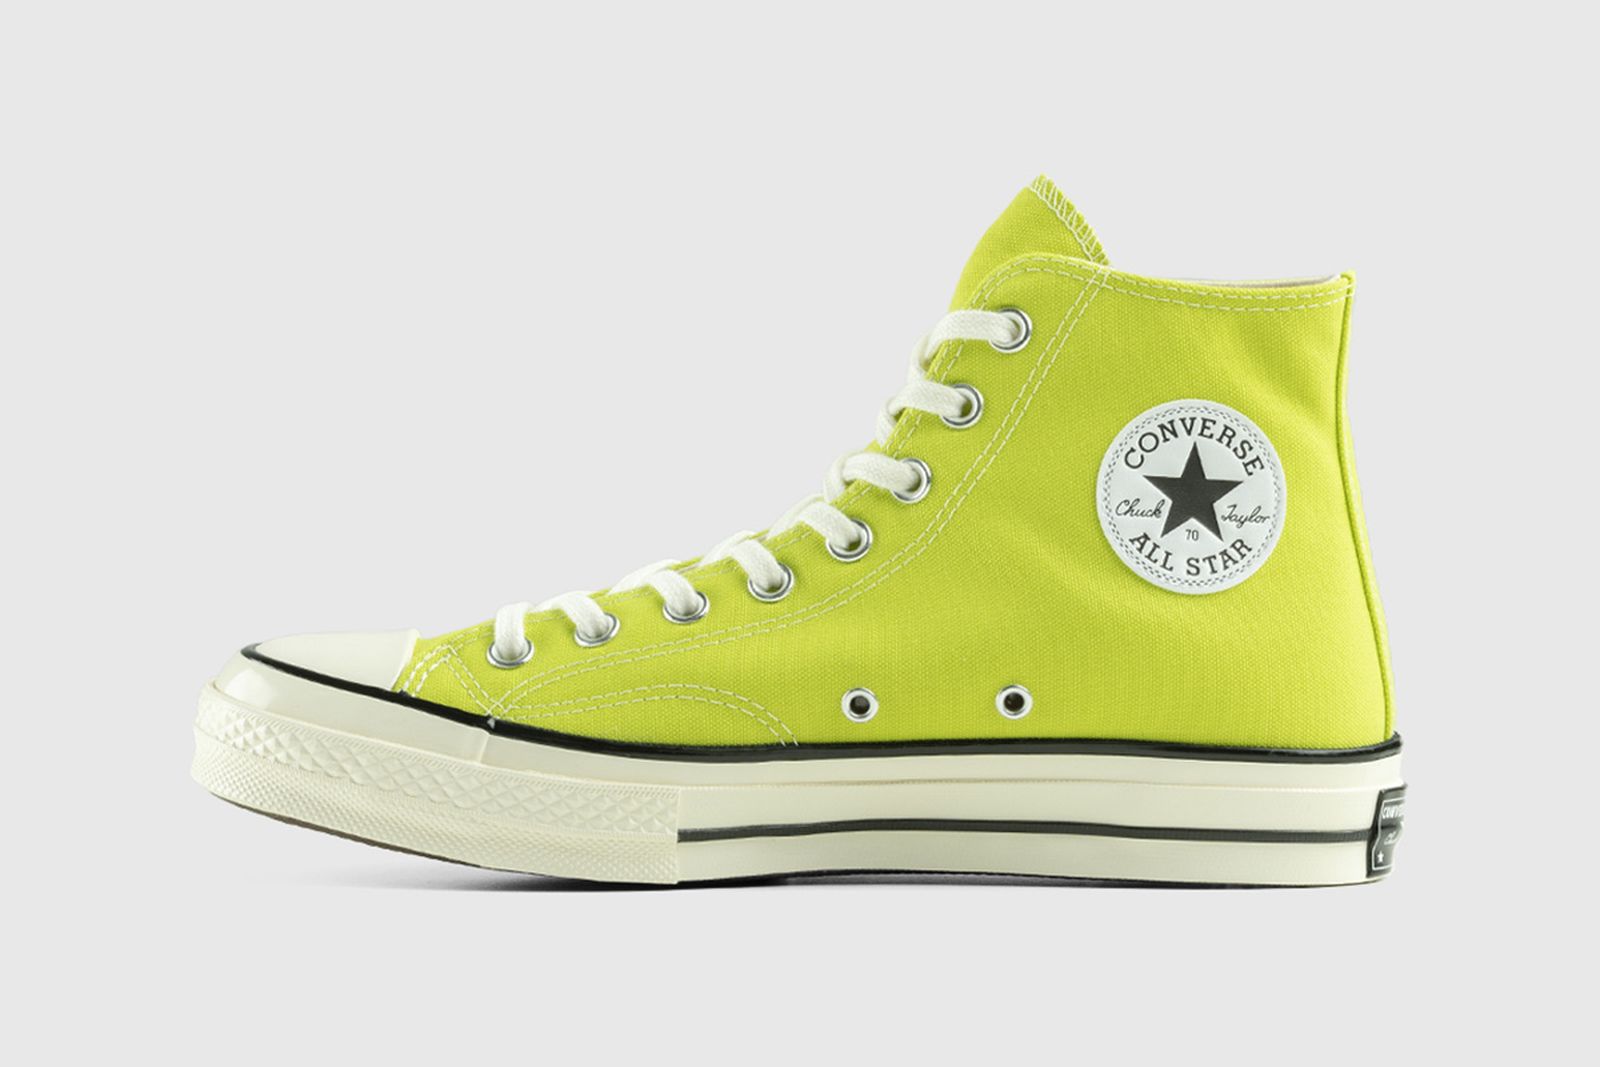 Gepland bouwer dichters Converse Chuck Taylor All Star Lime Green: Official Images & Info